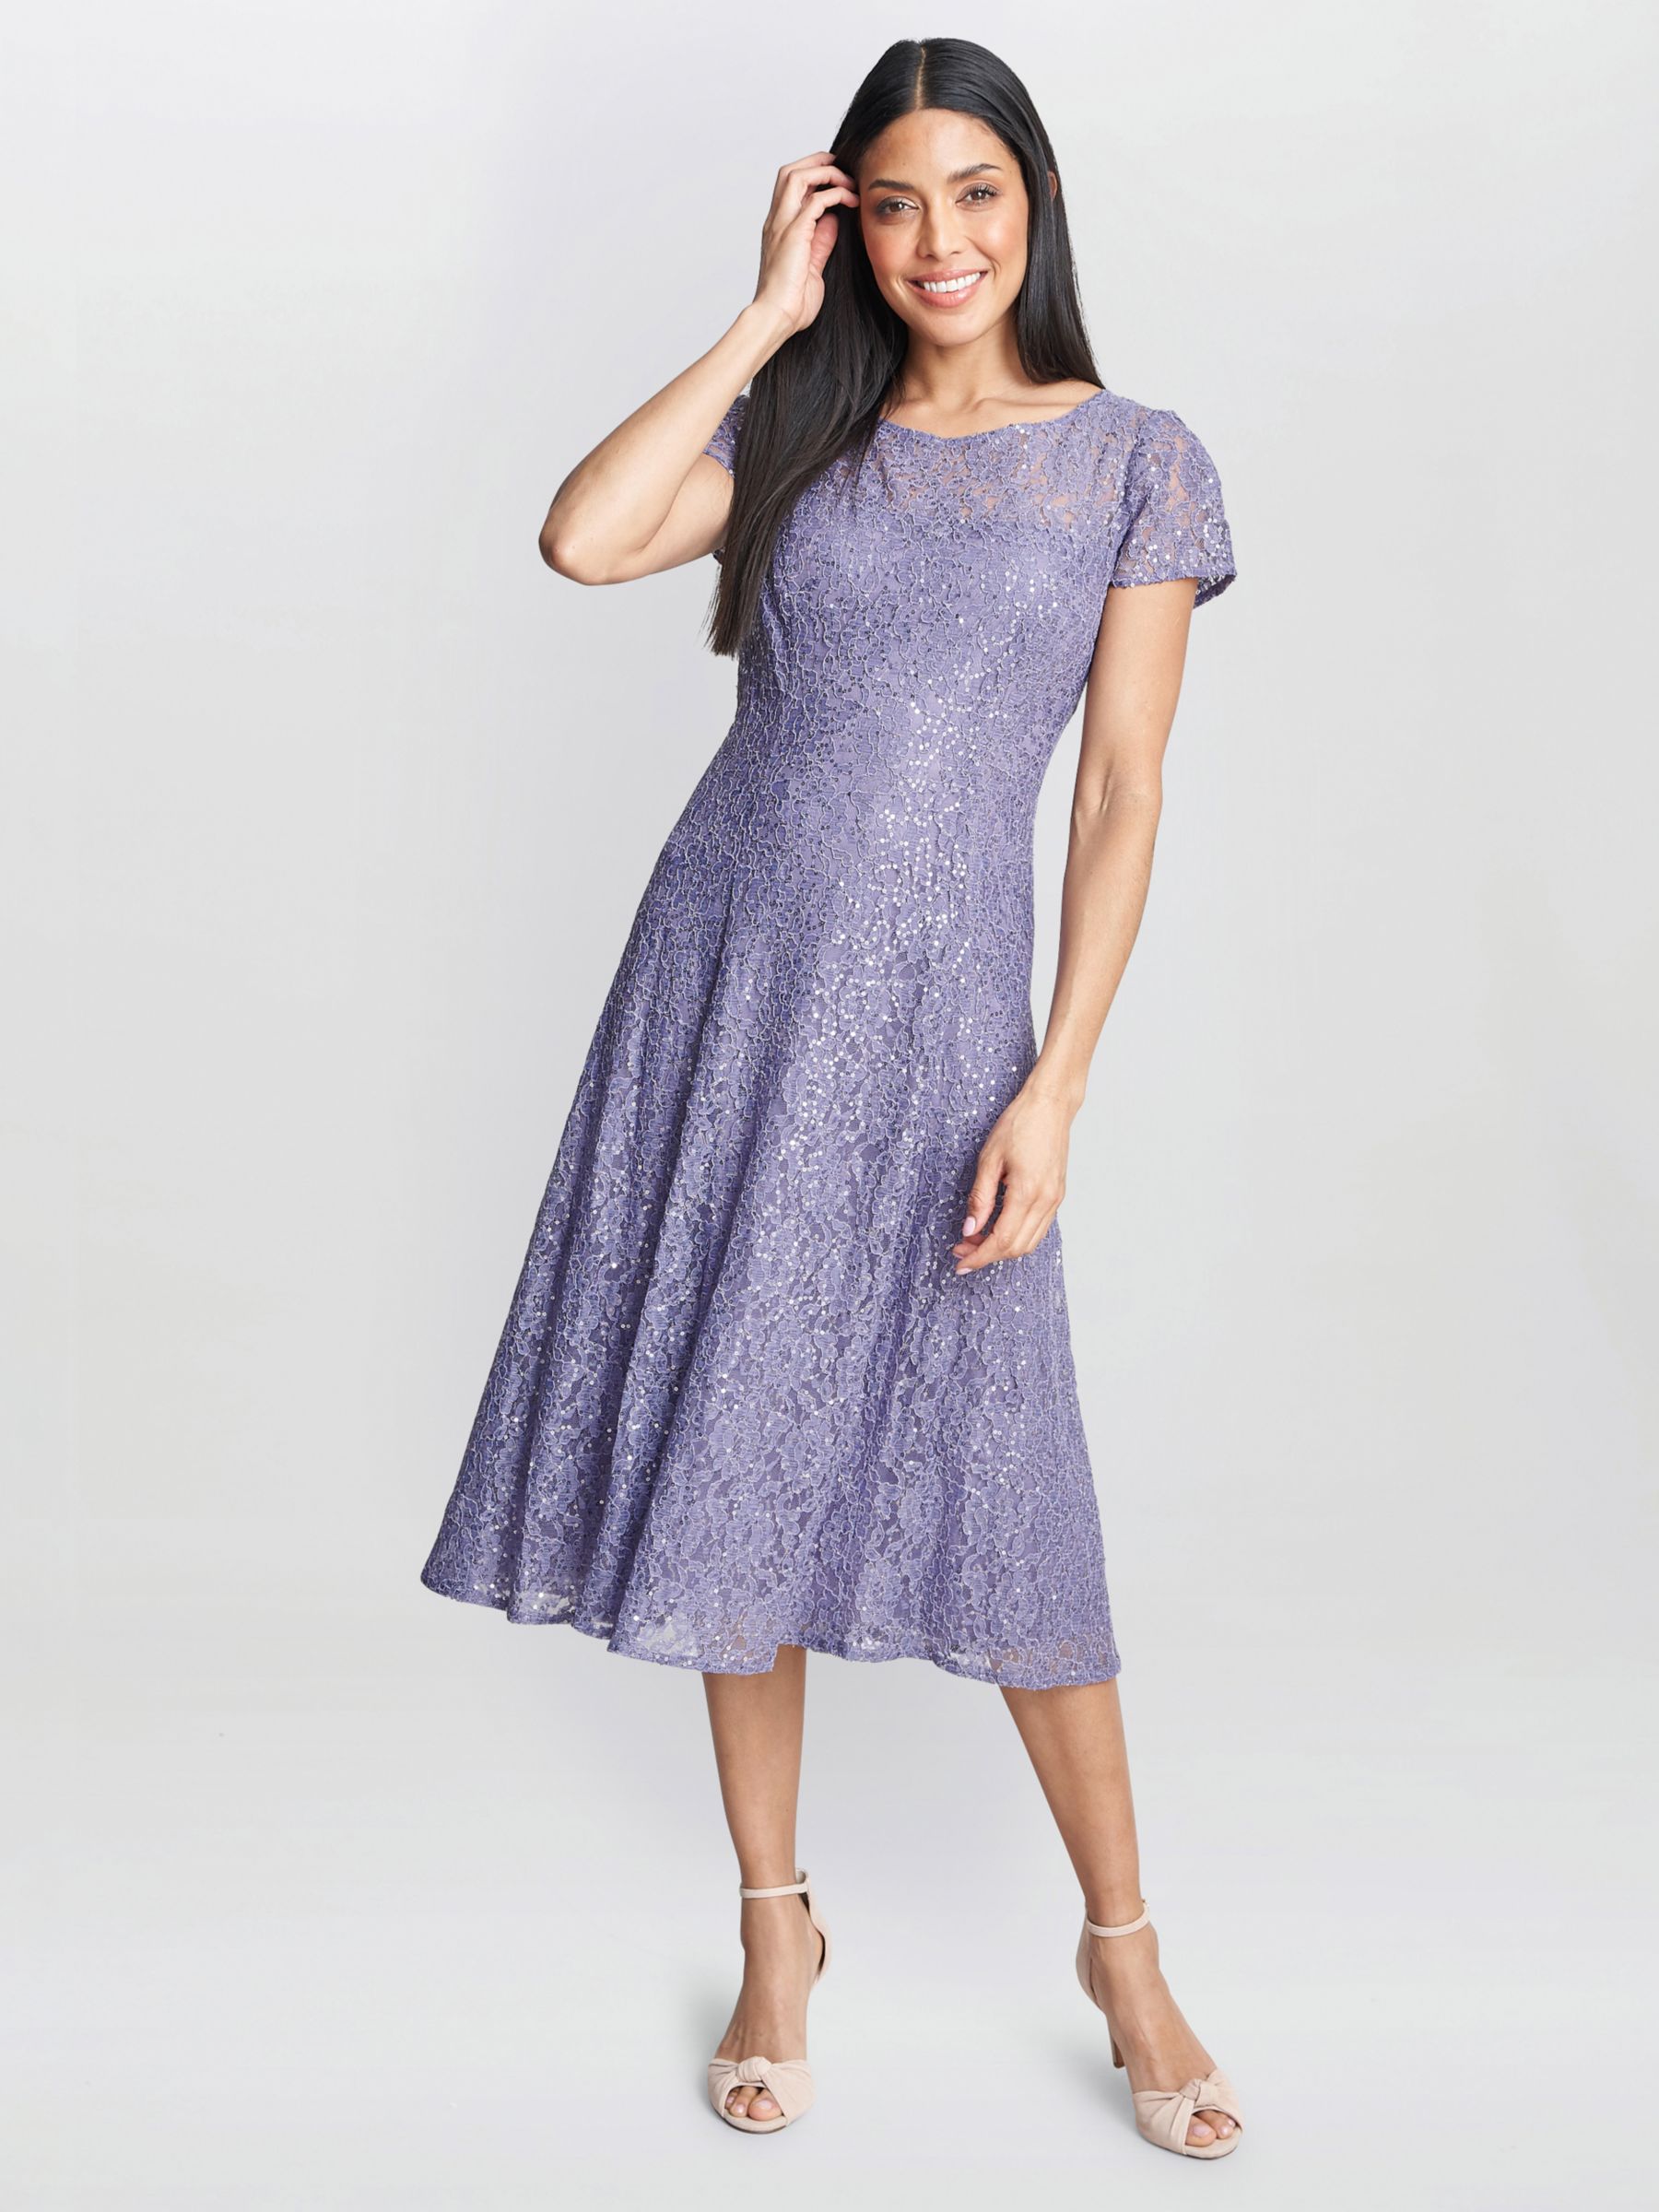 Gina Bacconi Genny Sequin A-Line Midi Dress, Lilac at John Lewis & Partners